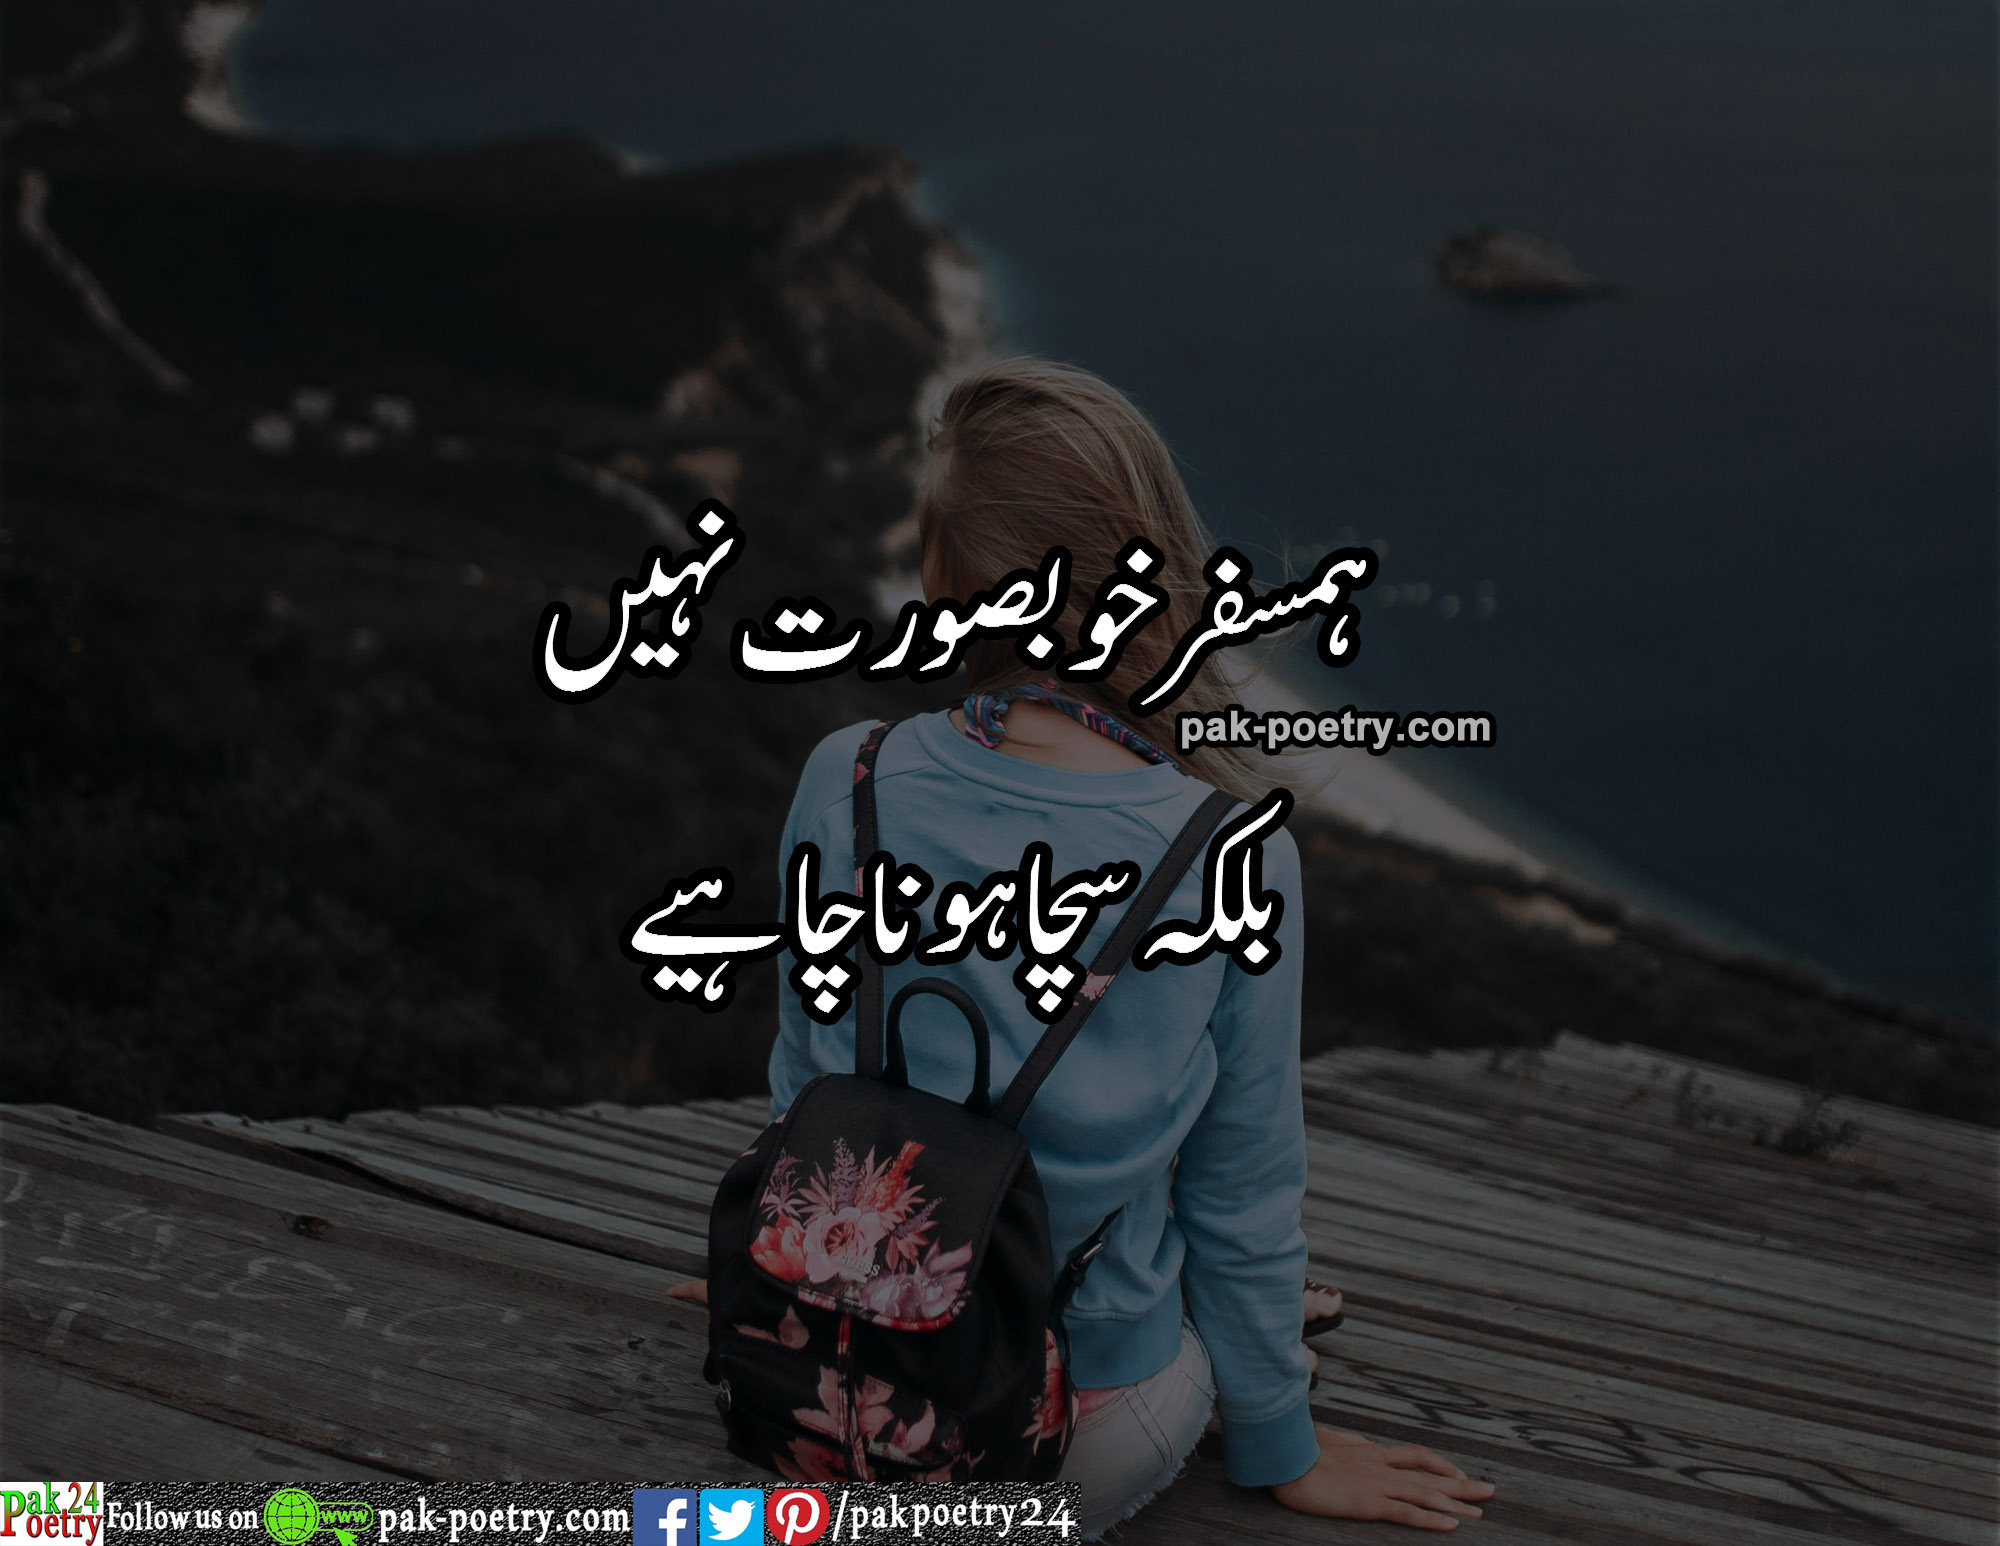 reality quotes, reality poetry in urdu, reality poetry, quotes about reality in urdu, poetry about reality in urdu, sad reality, poetry reality, poetry on reality, reality best poetry urdu, sad reality poetry in urdu, reality based poetry in urdu, poetry about reality, reality, Poetry in urdu, urdu poetry, poetry urdu,